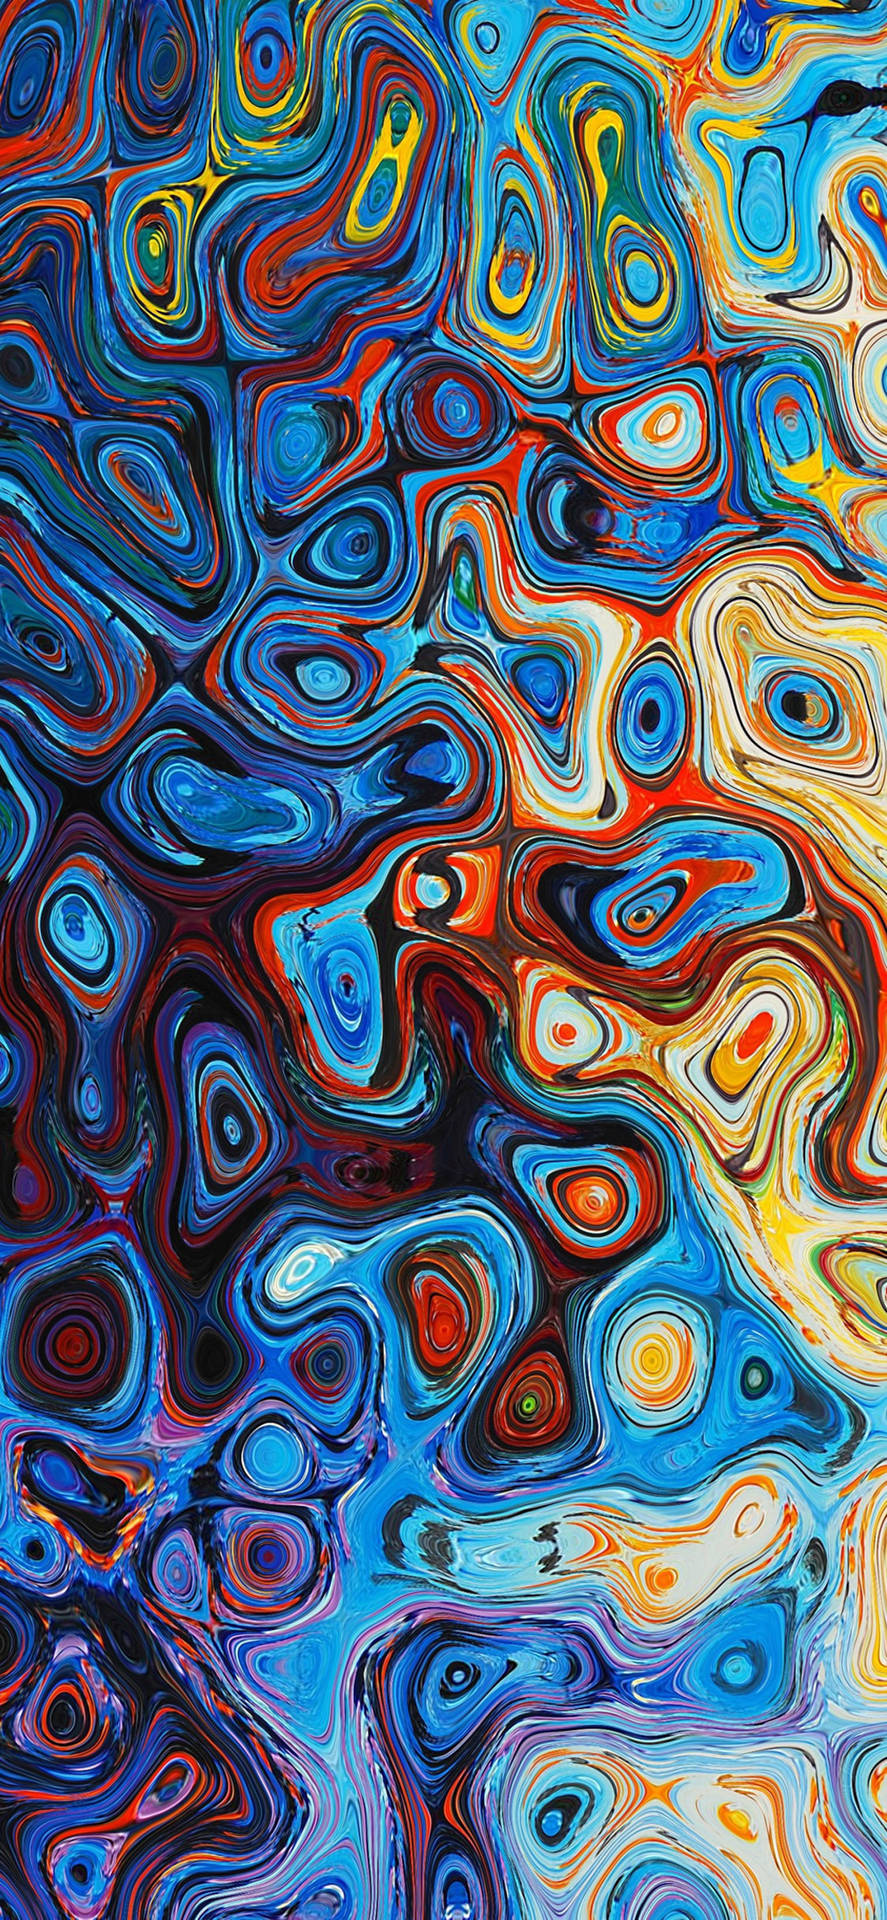 Abstract Swirling Patterns Top Iphone Hd